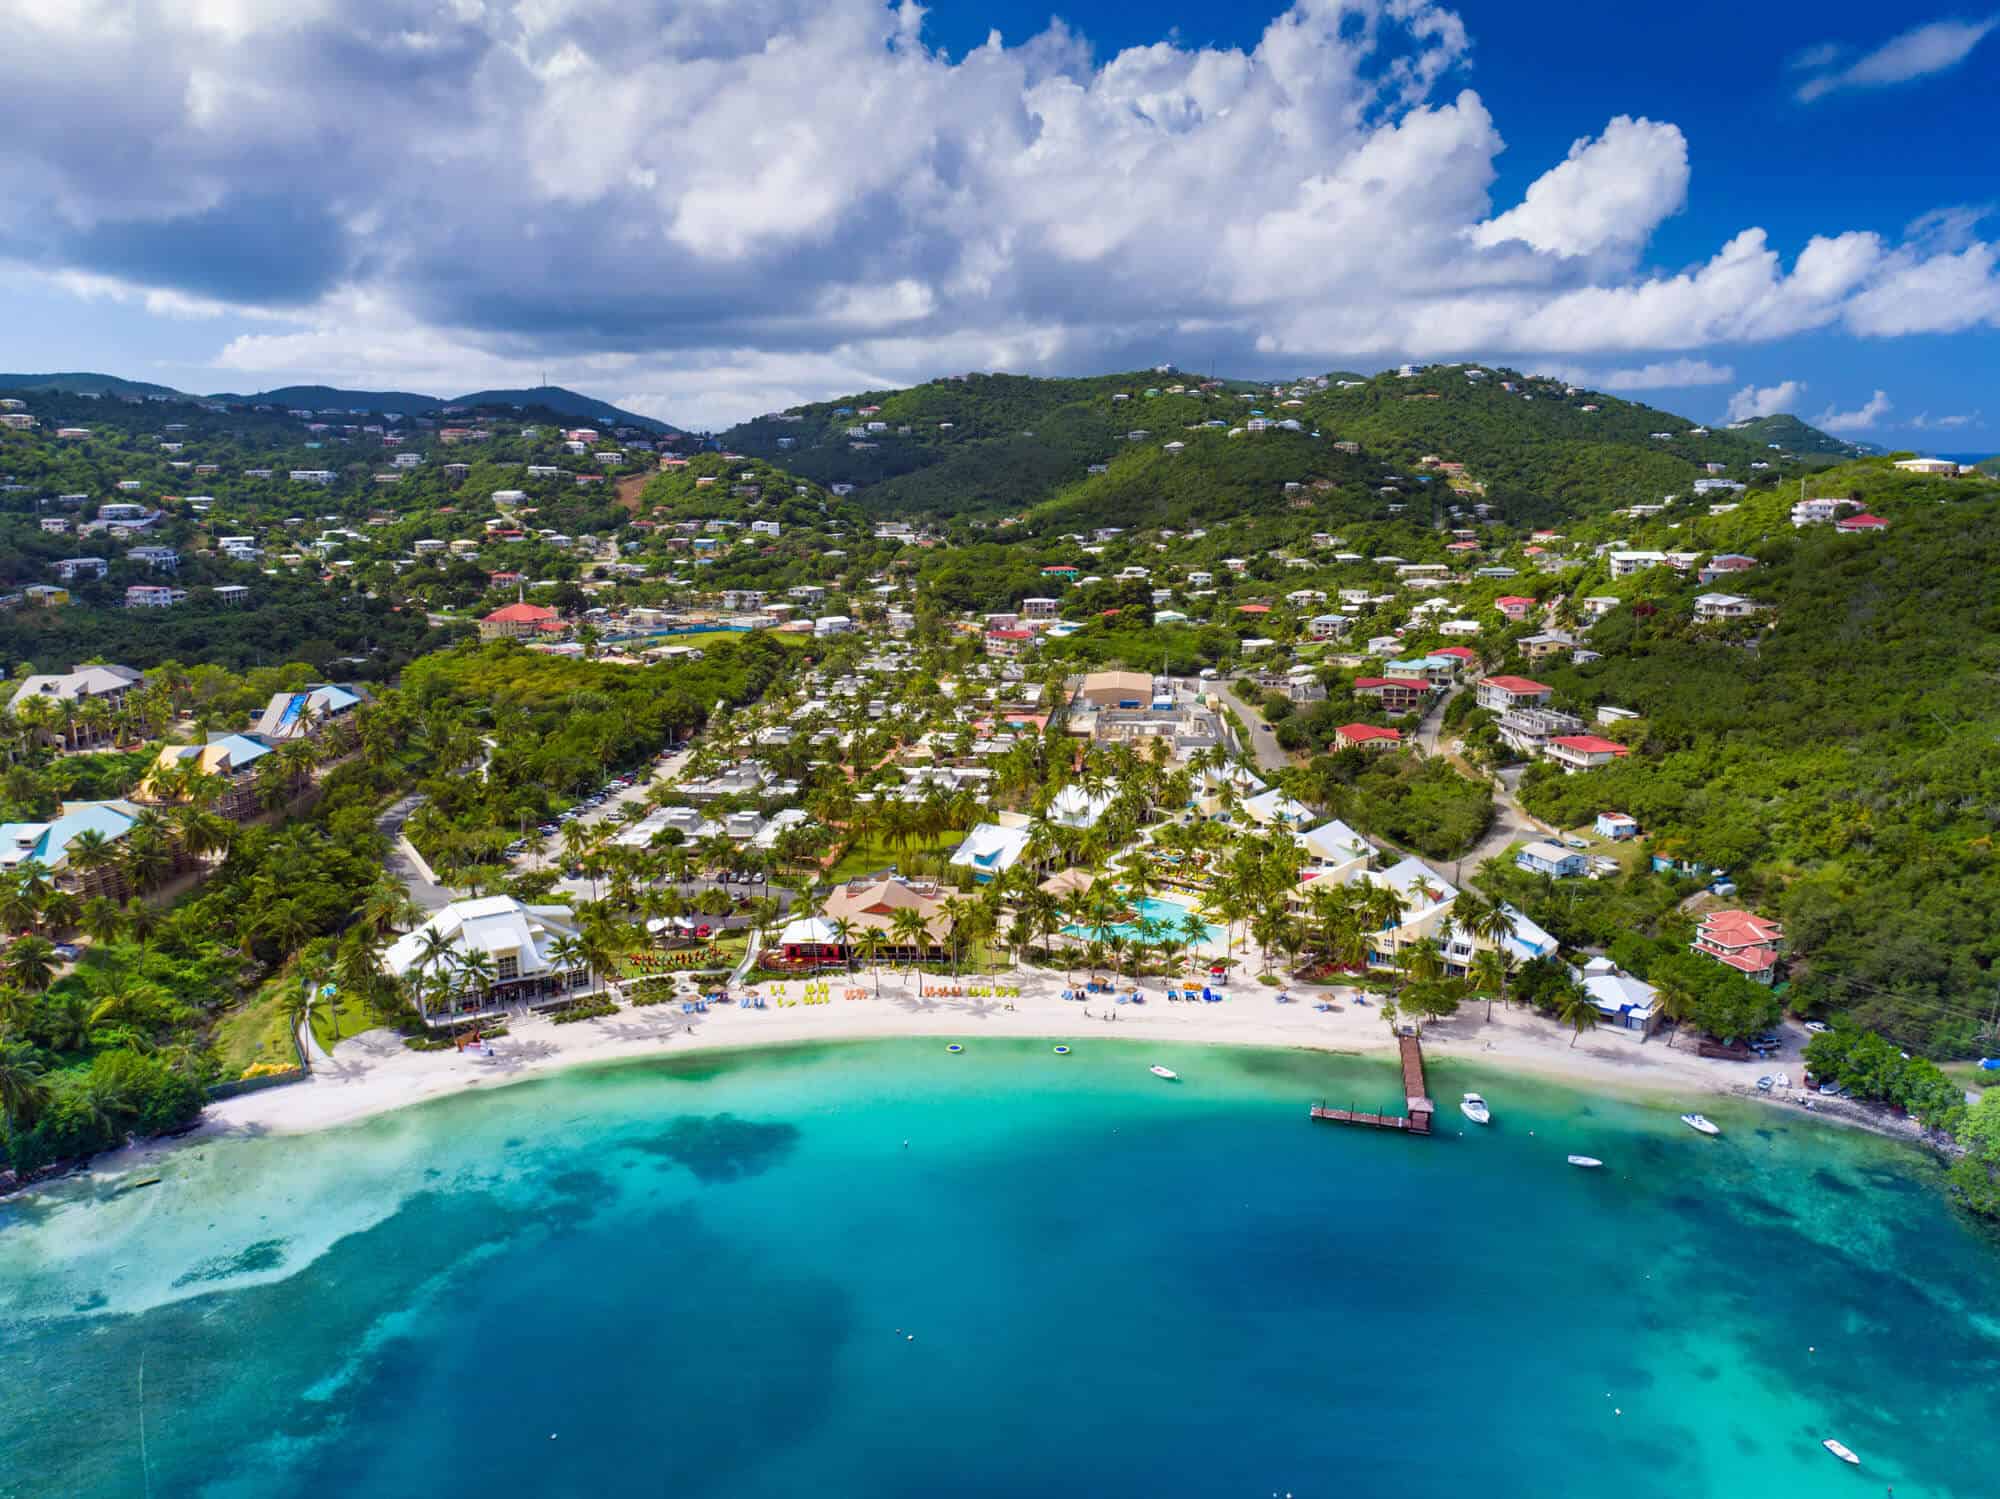 adoption-in-virgin-islands-laws-rules-and-qualifications